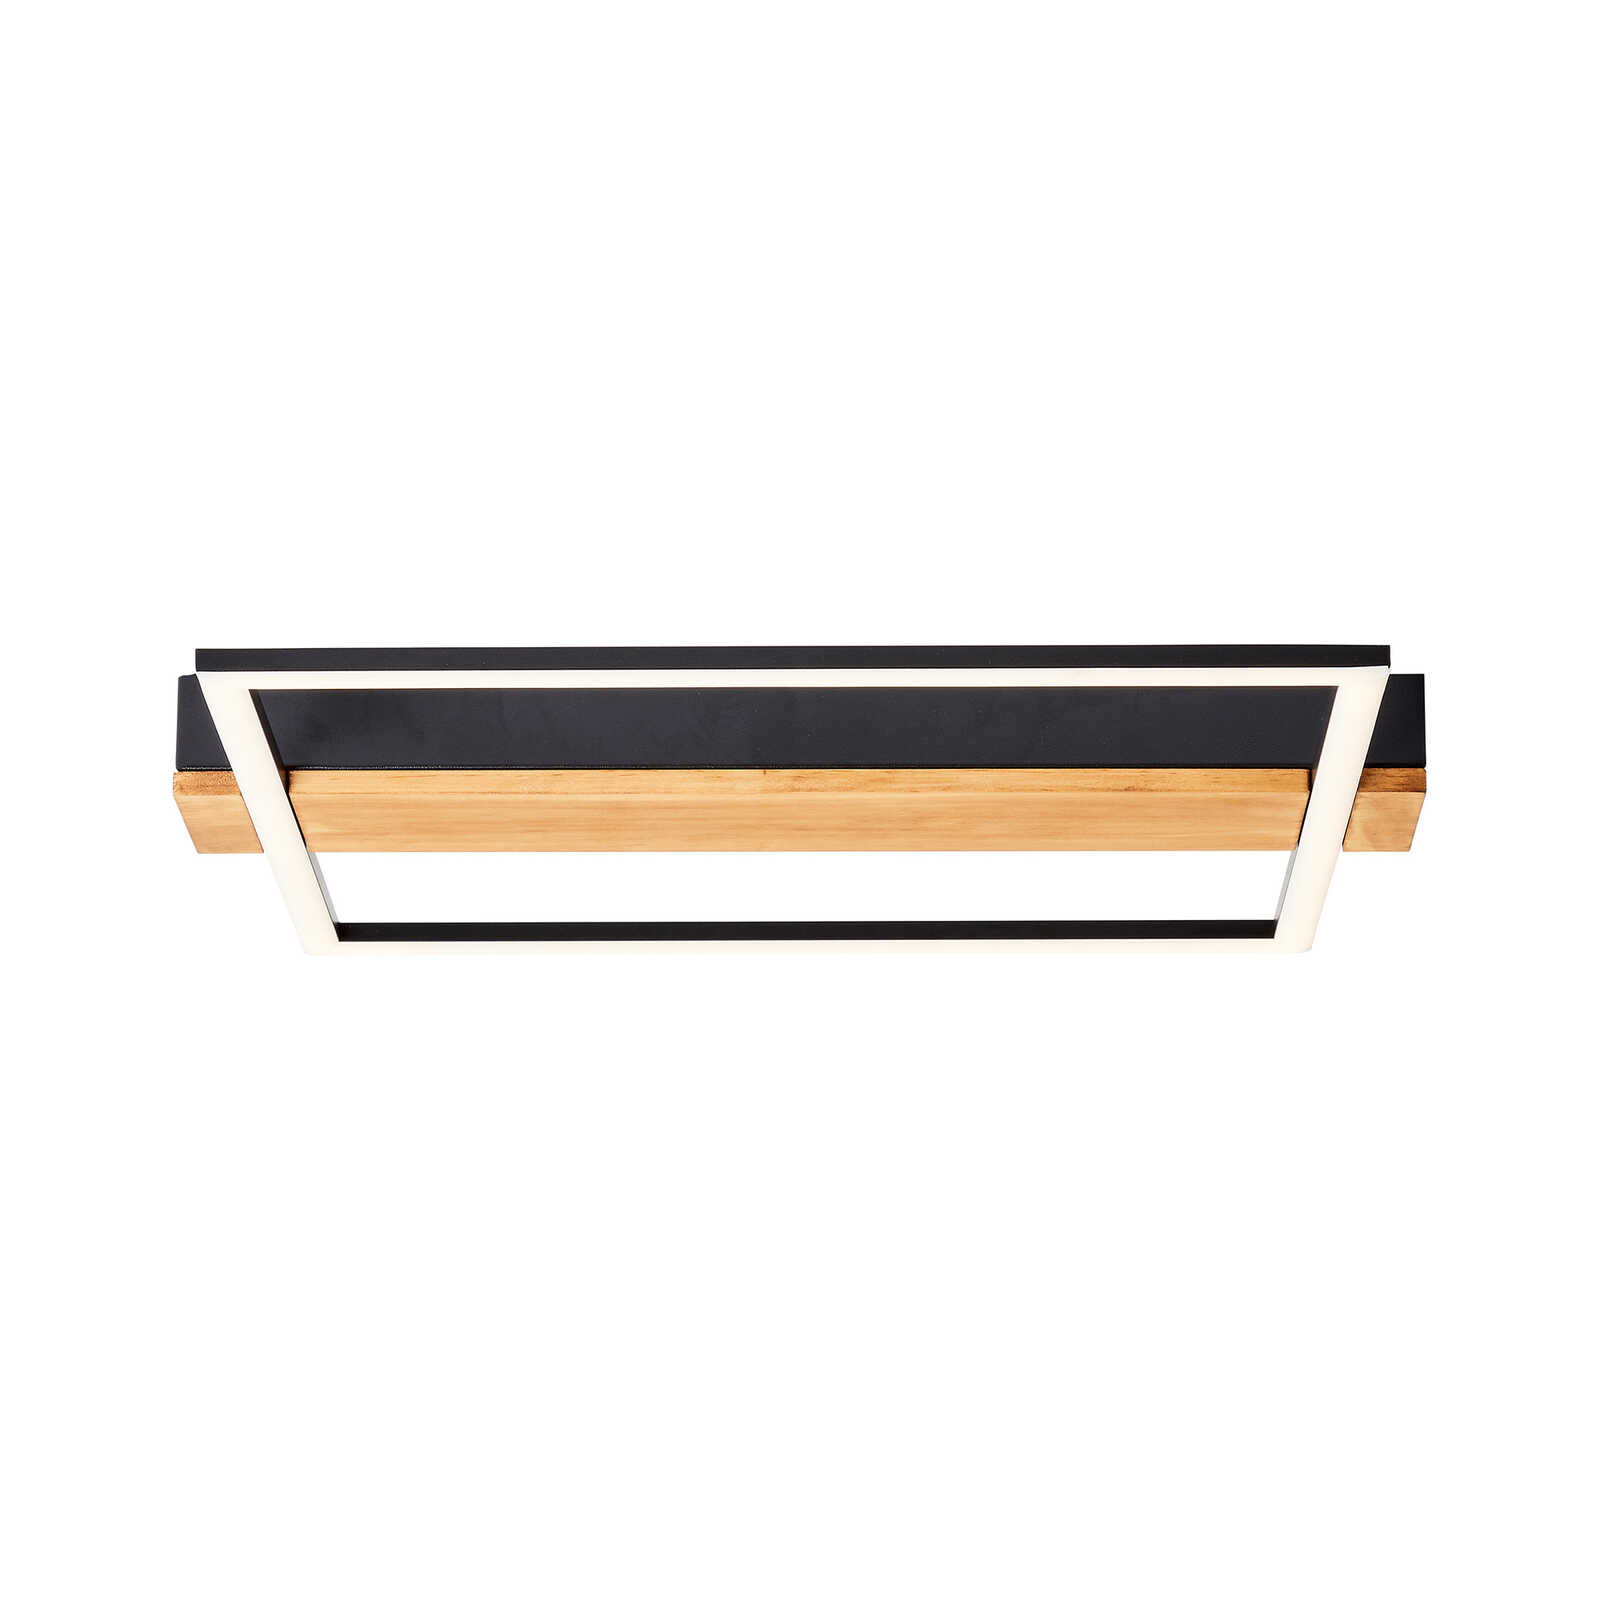 Wooden ceiling light - Layla 2 - Brown
